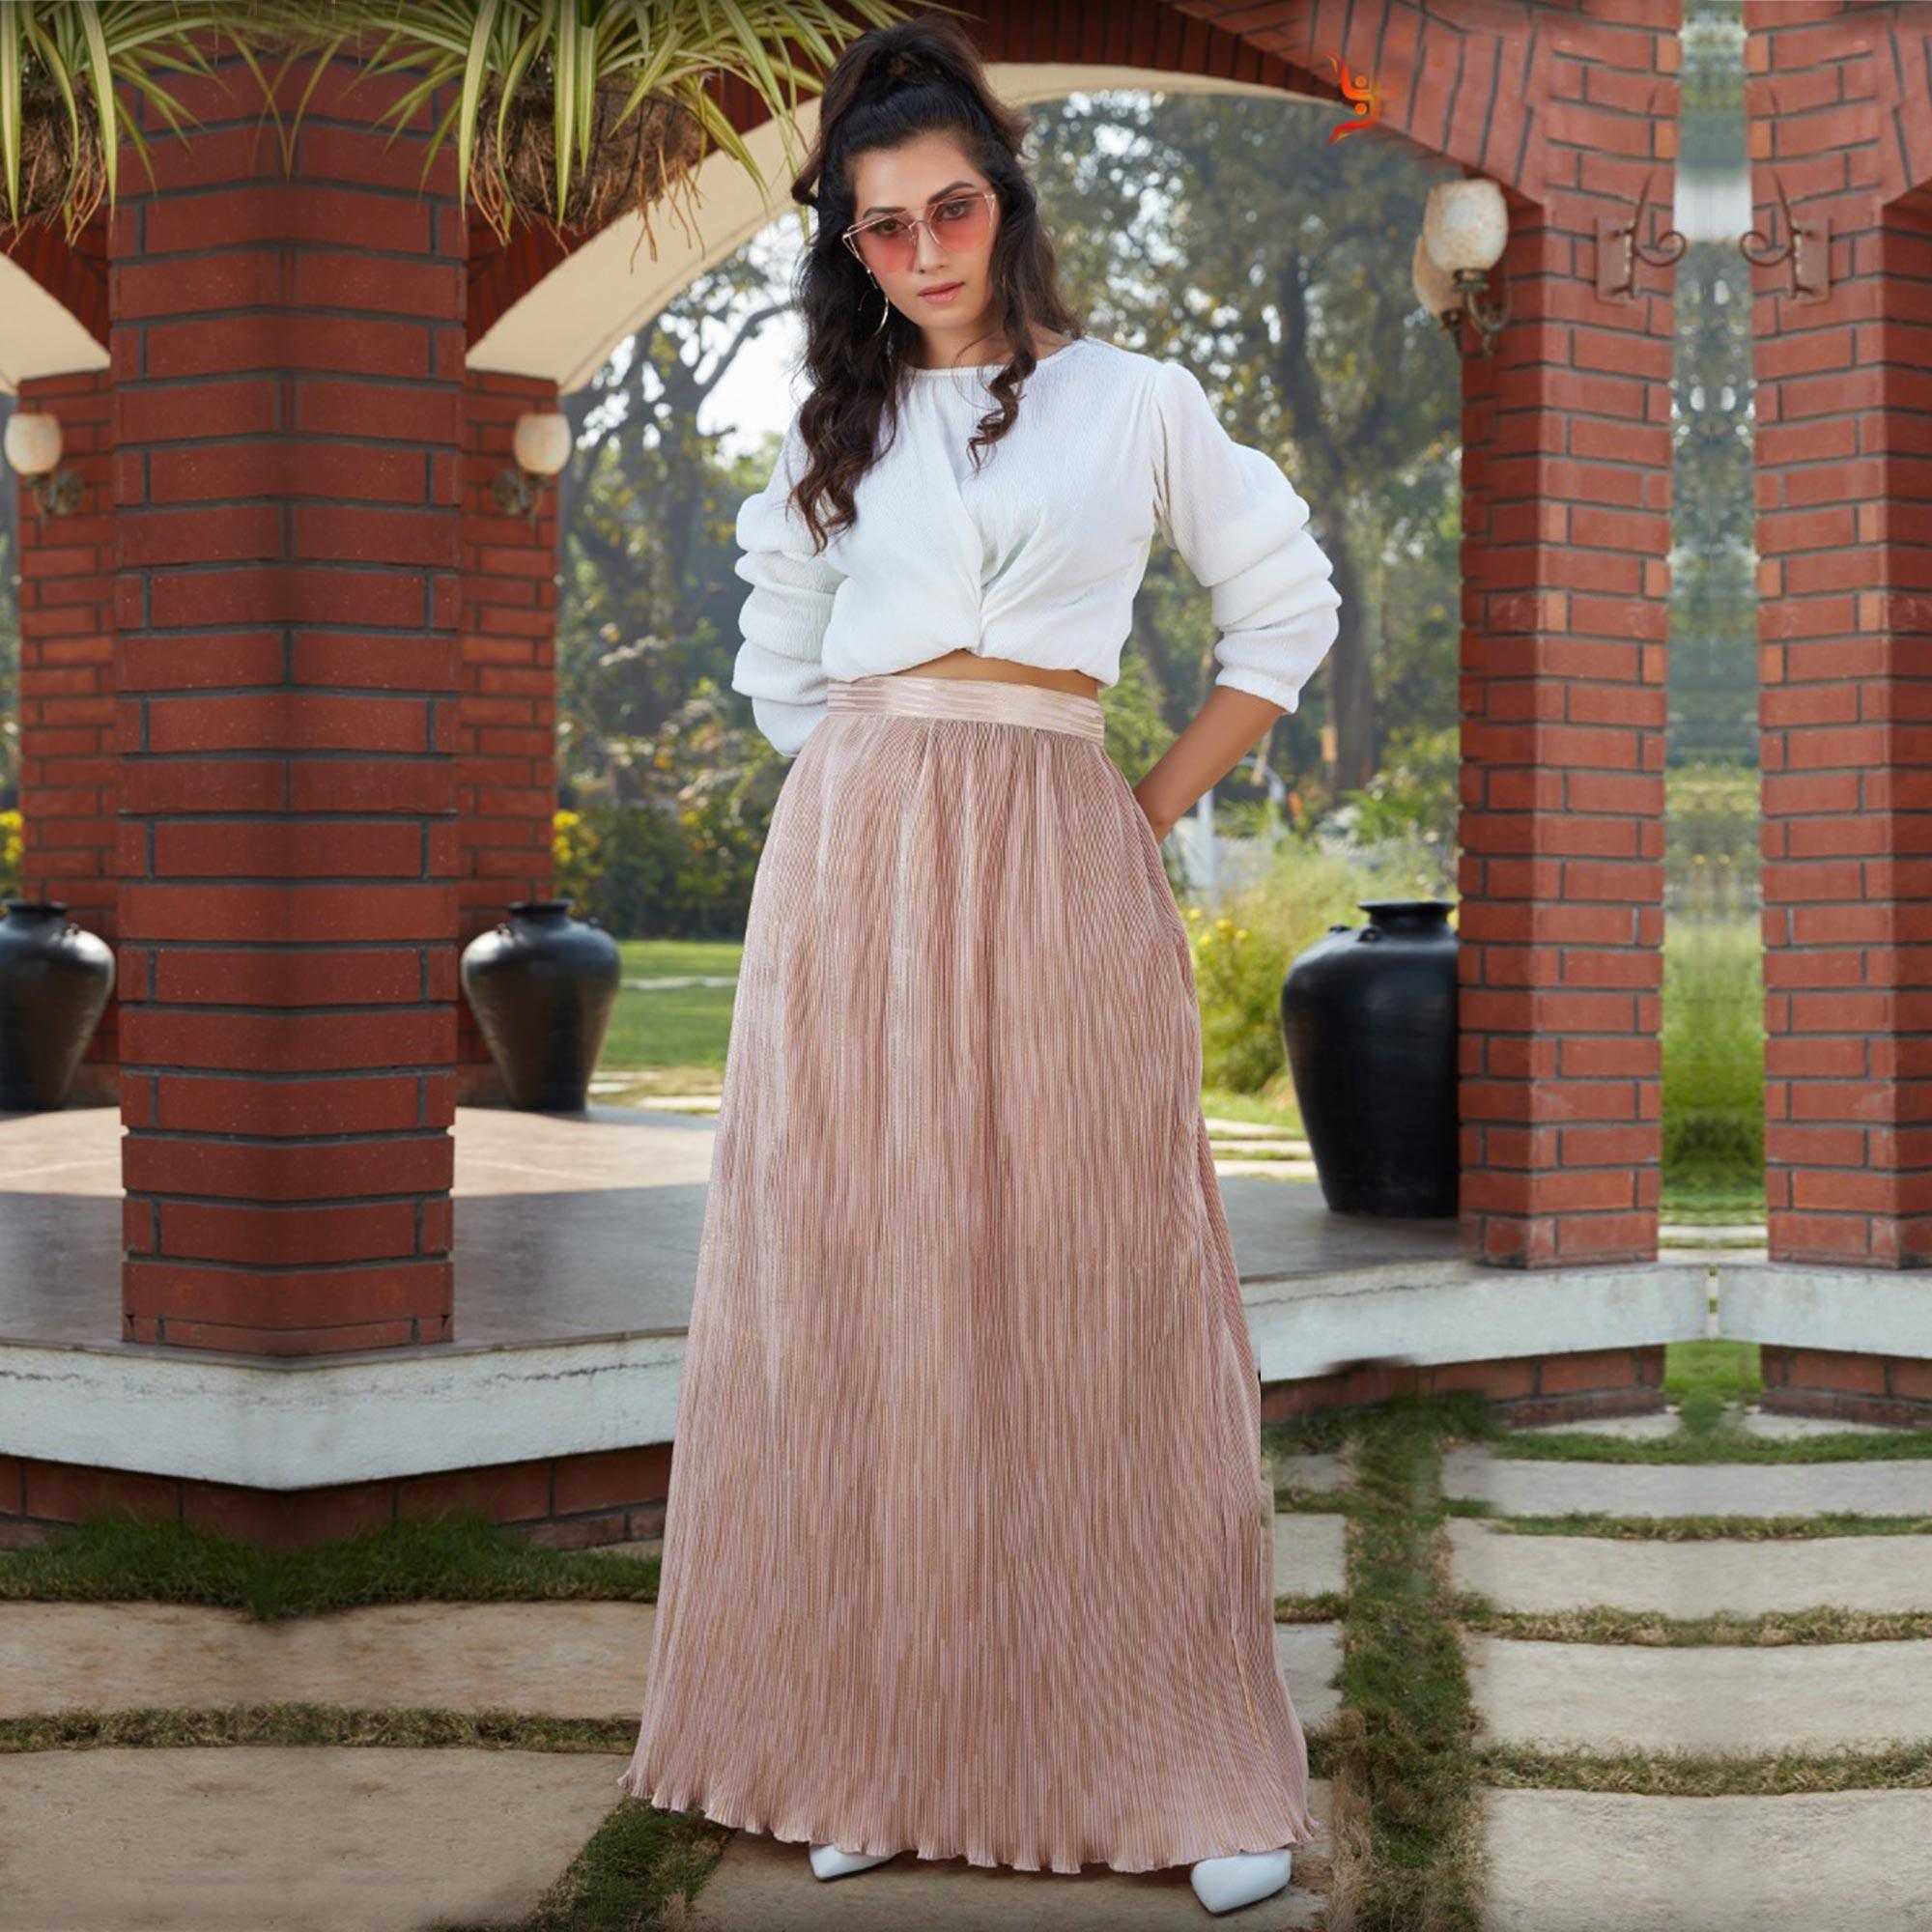 long skirt and top images